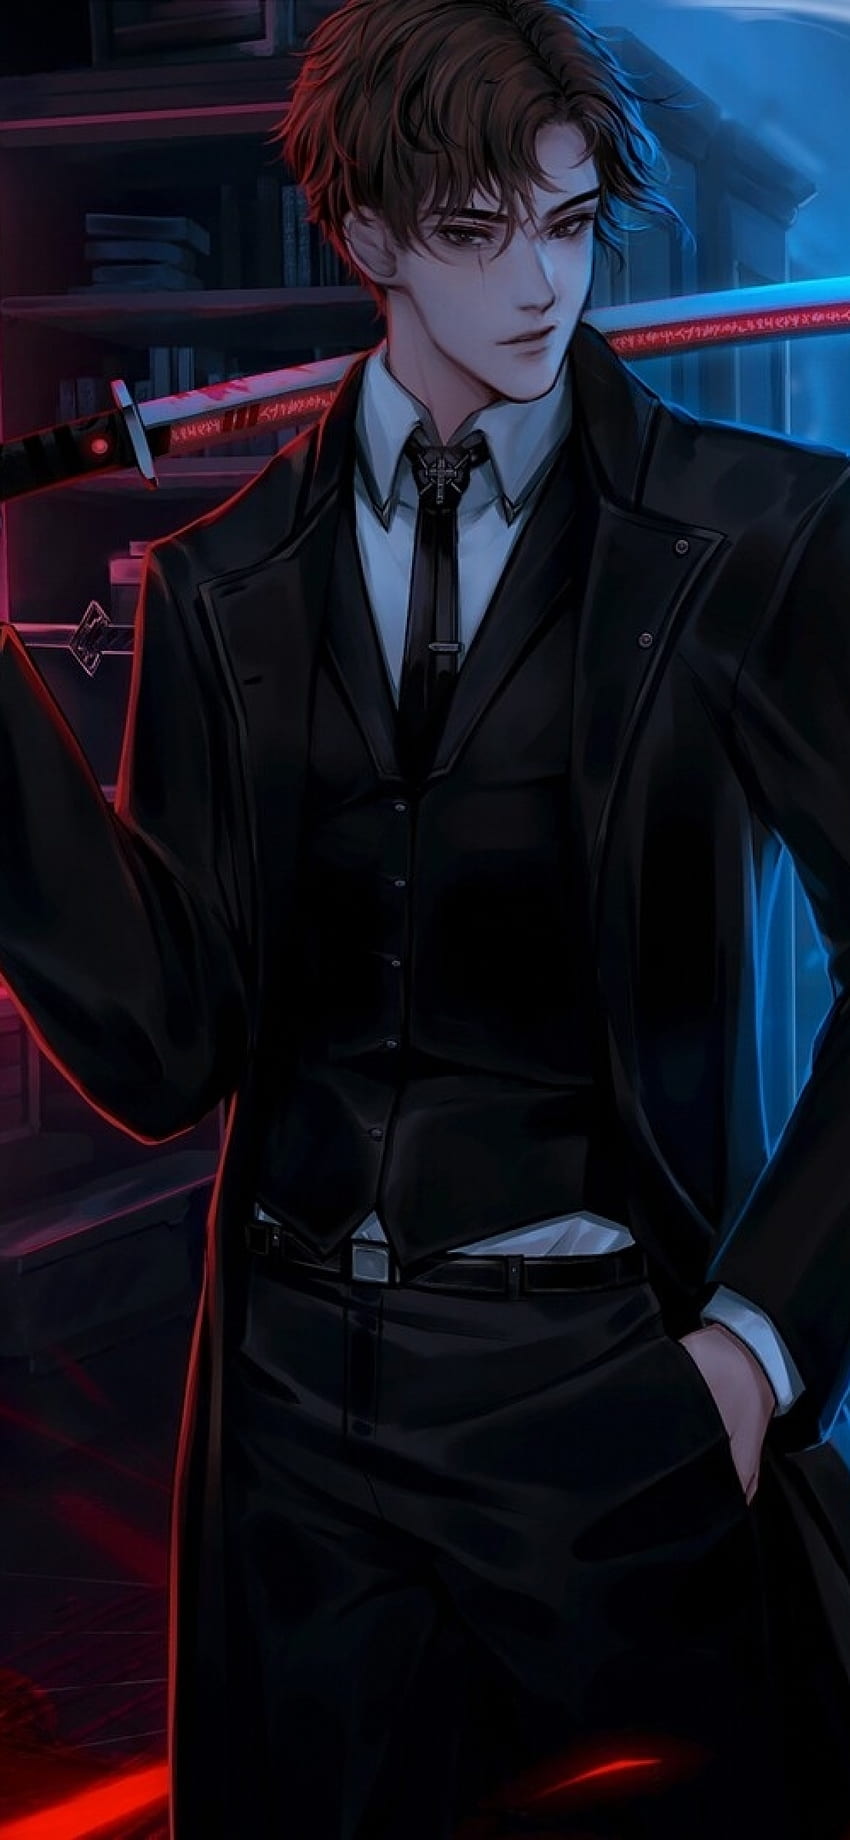 Cool Anime Character in a Dapper Suit